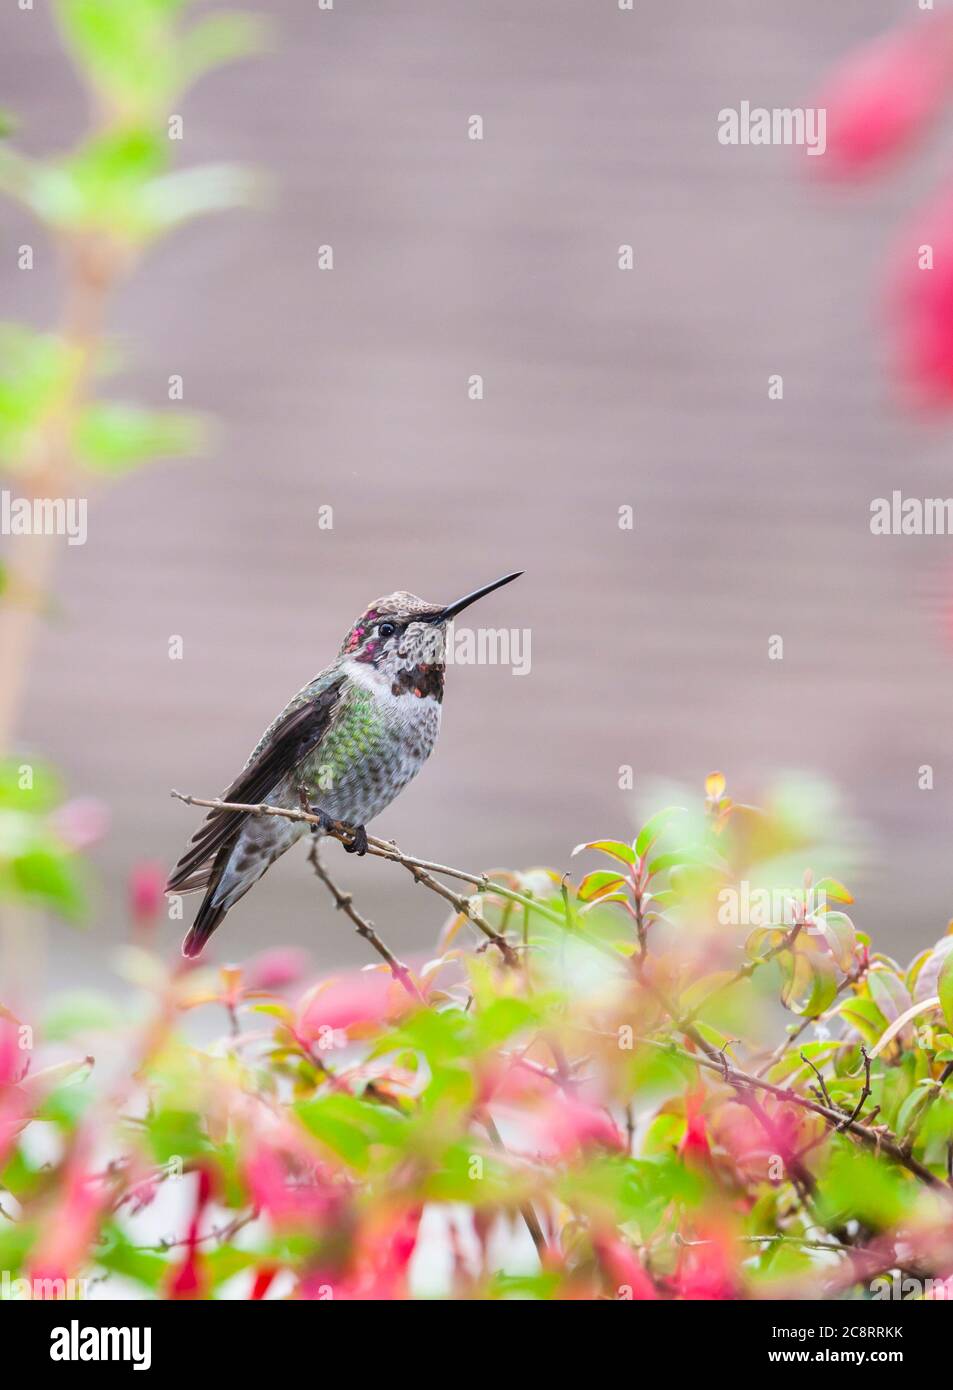 Anna's Hummingbird, Calypte anna, perching on a flowering Fuchsia plant at Point Arena Cove in Point Arena, California. Stock Photo